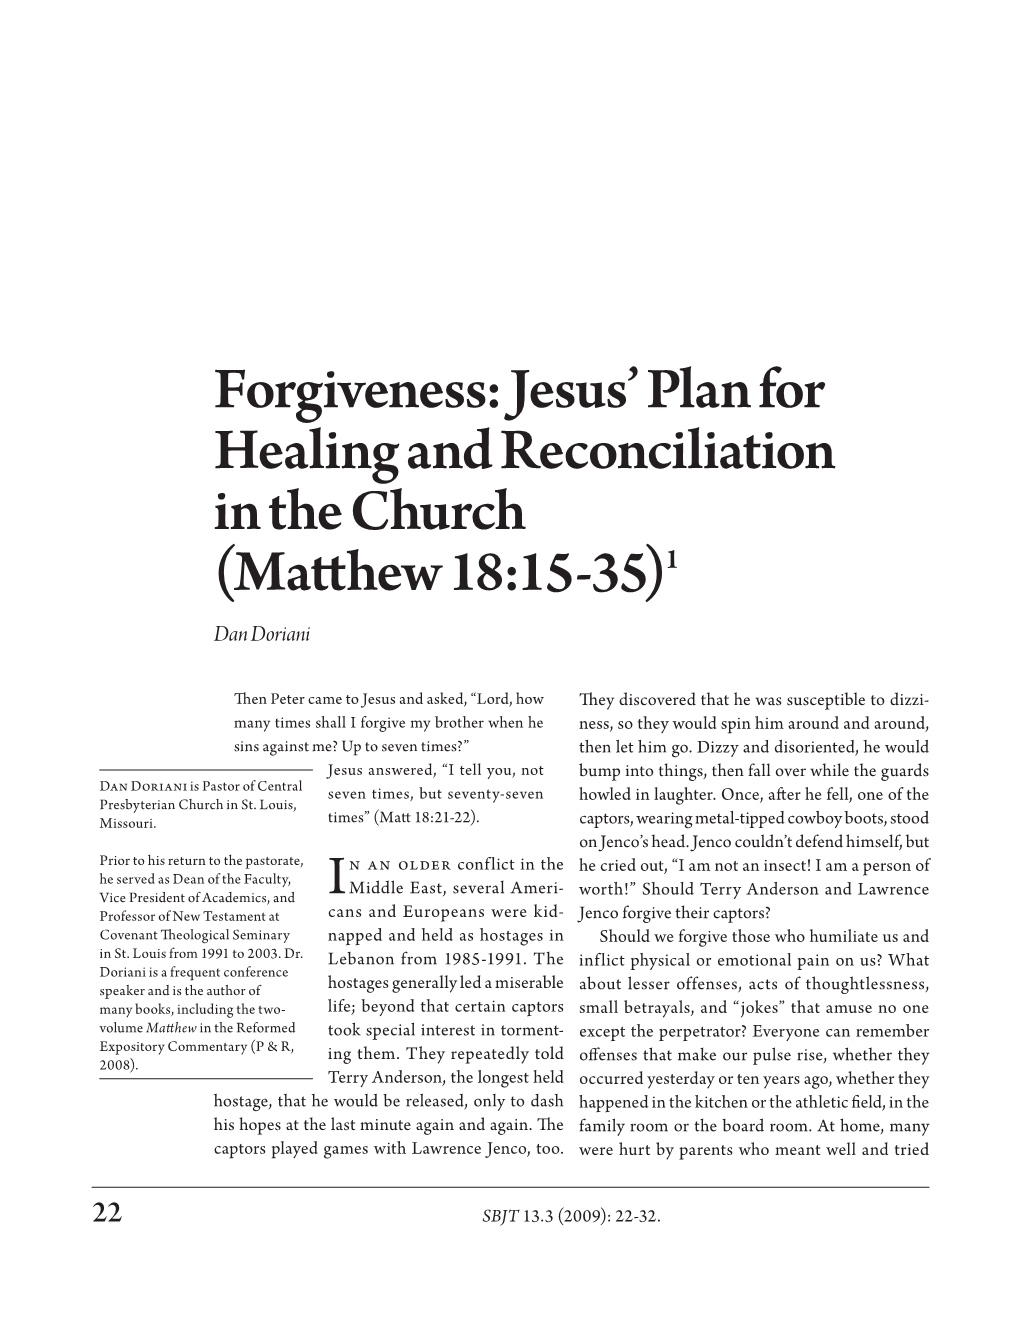 Forgiveness:Jesus' Plan for Healing and Reconciliation in the Church